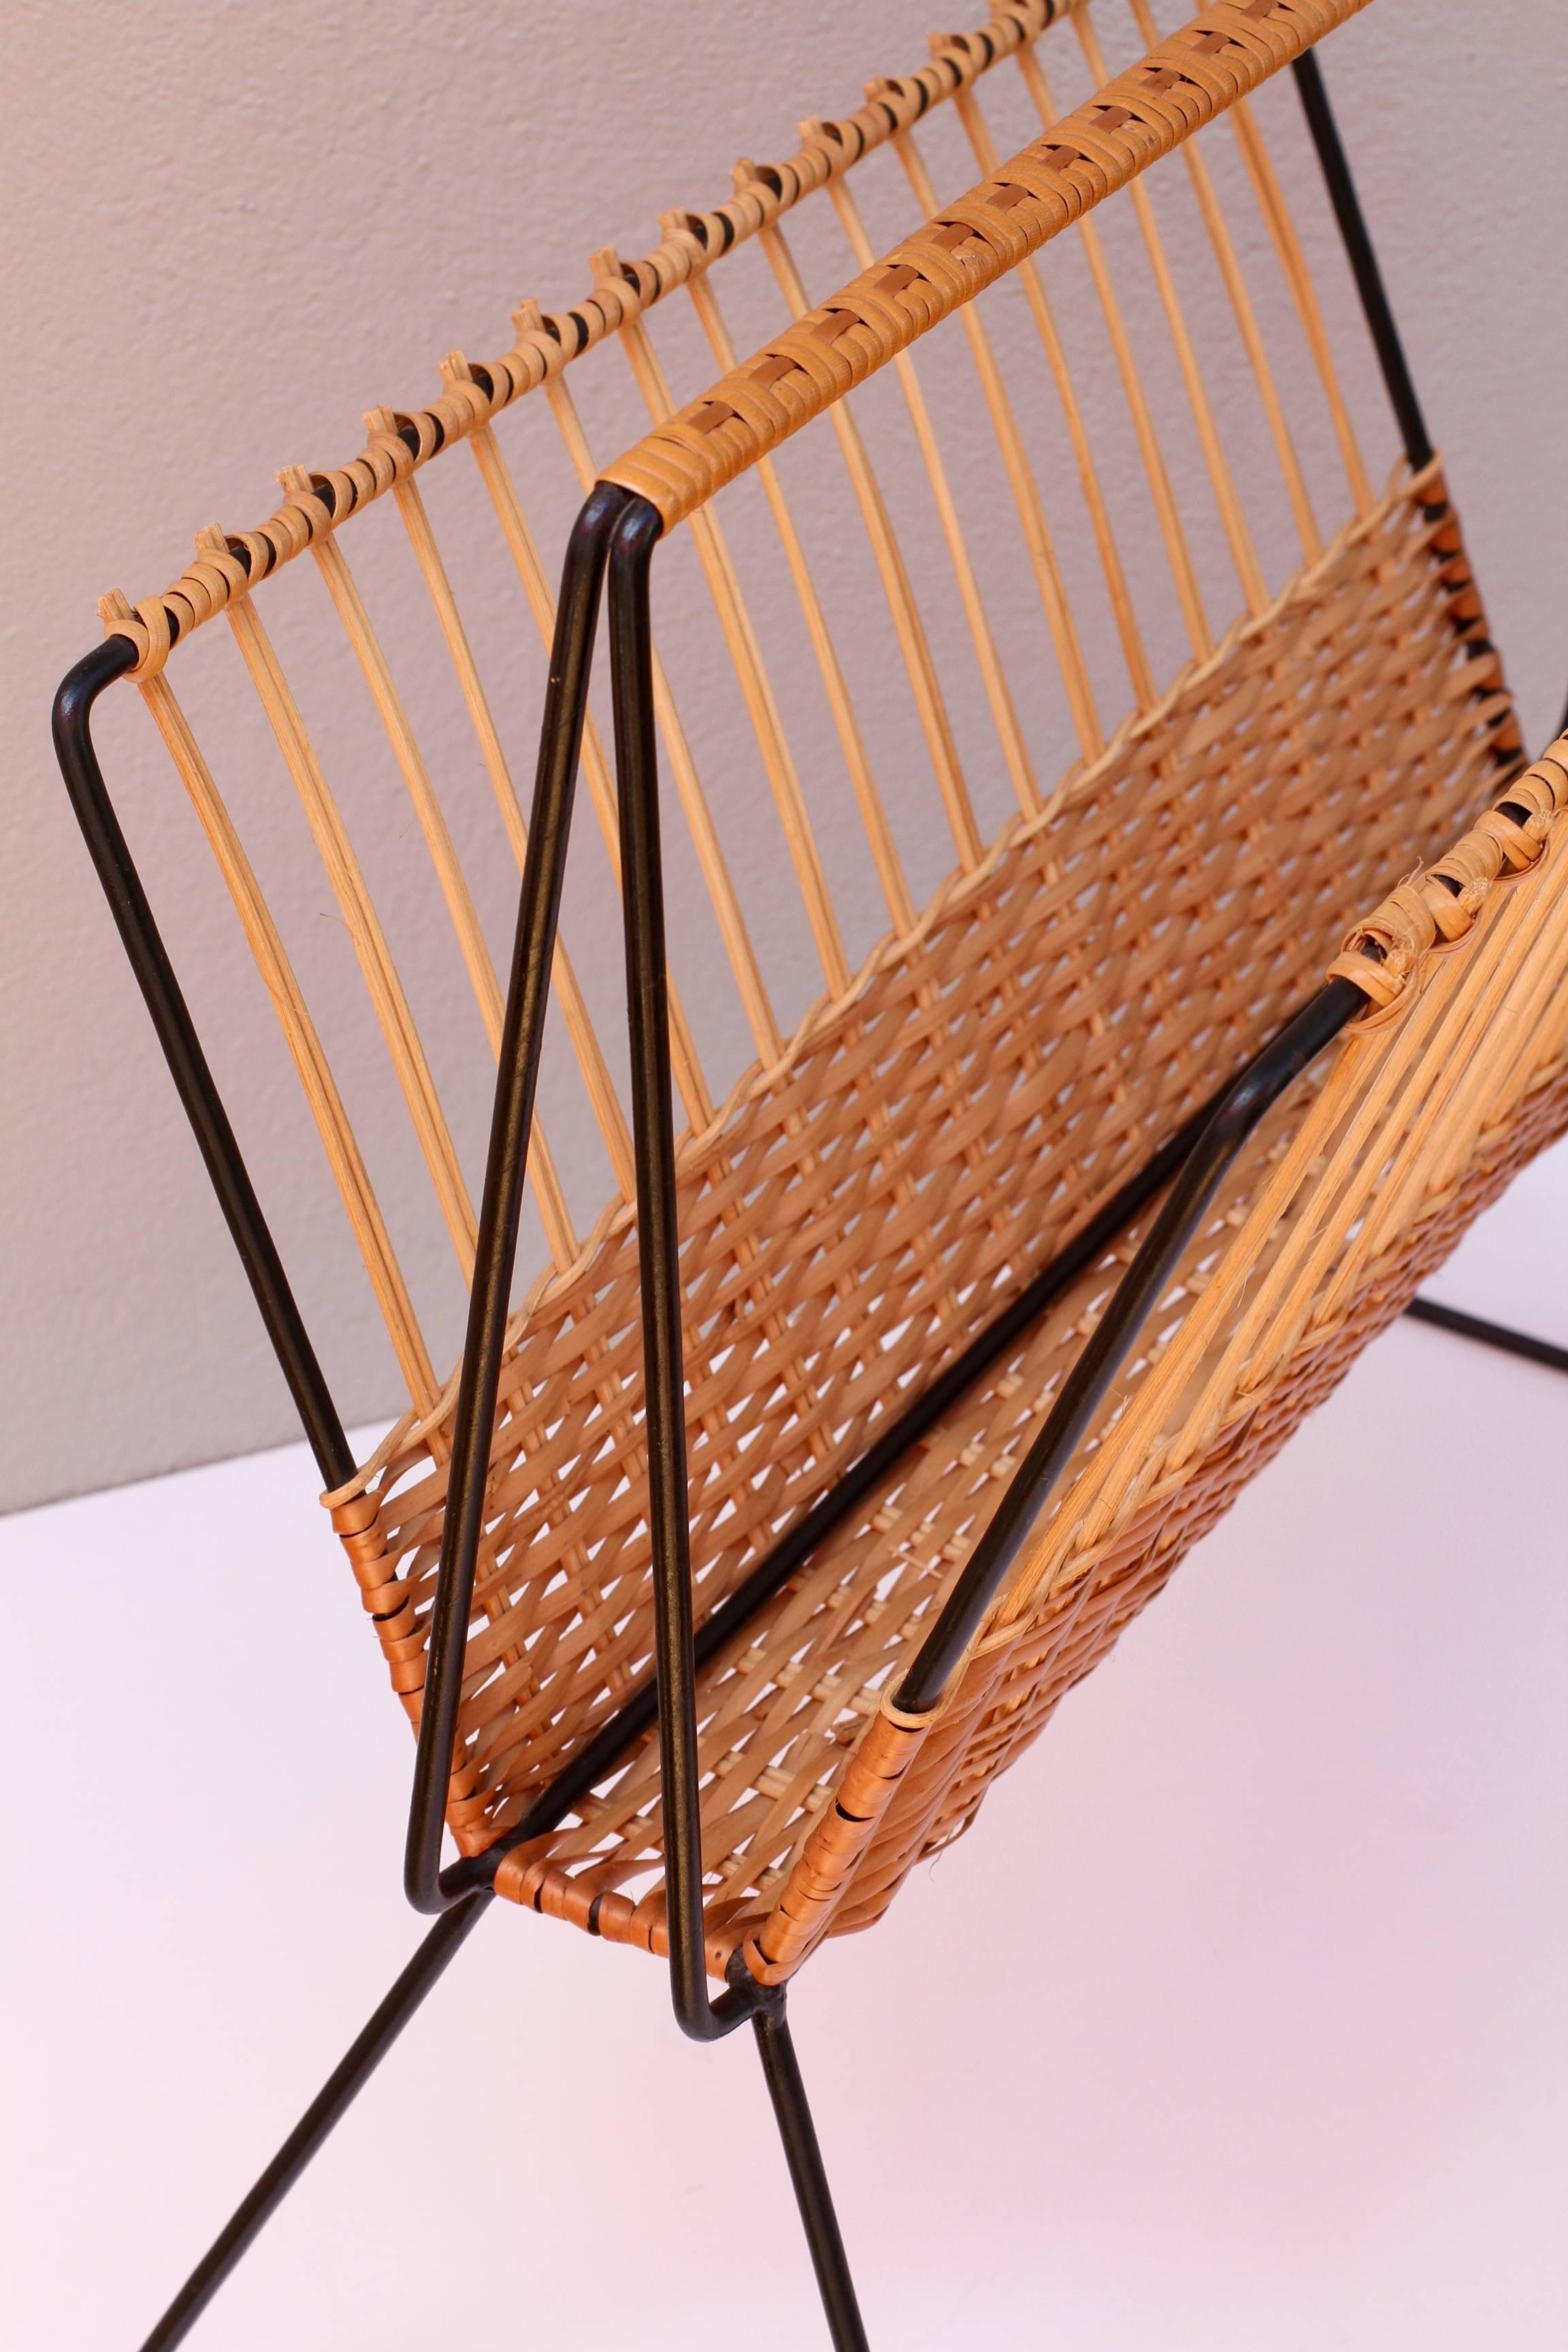 20th Century Mid-Century Modernist Wicker Magazine Rack Stand in the Style of Rohe Noordwolde